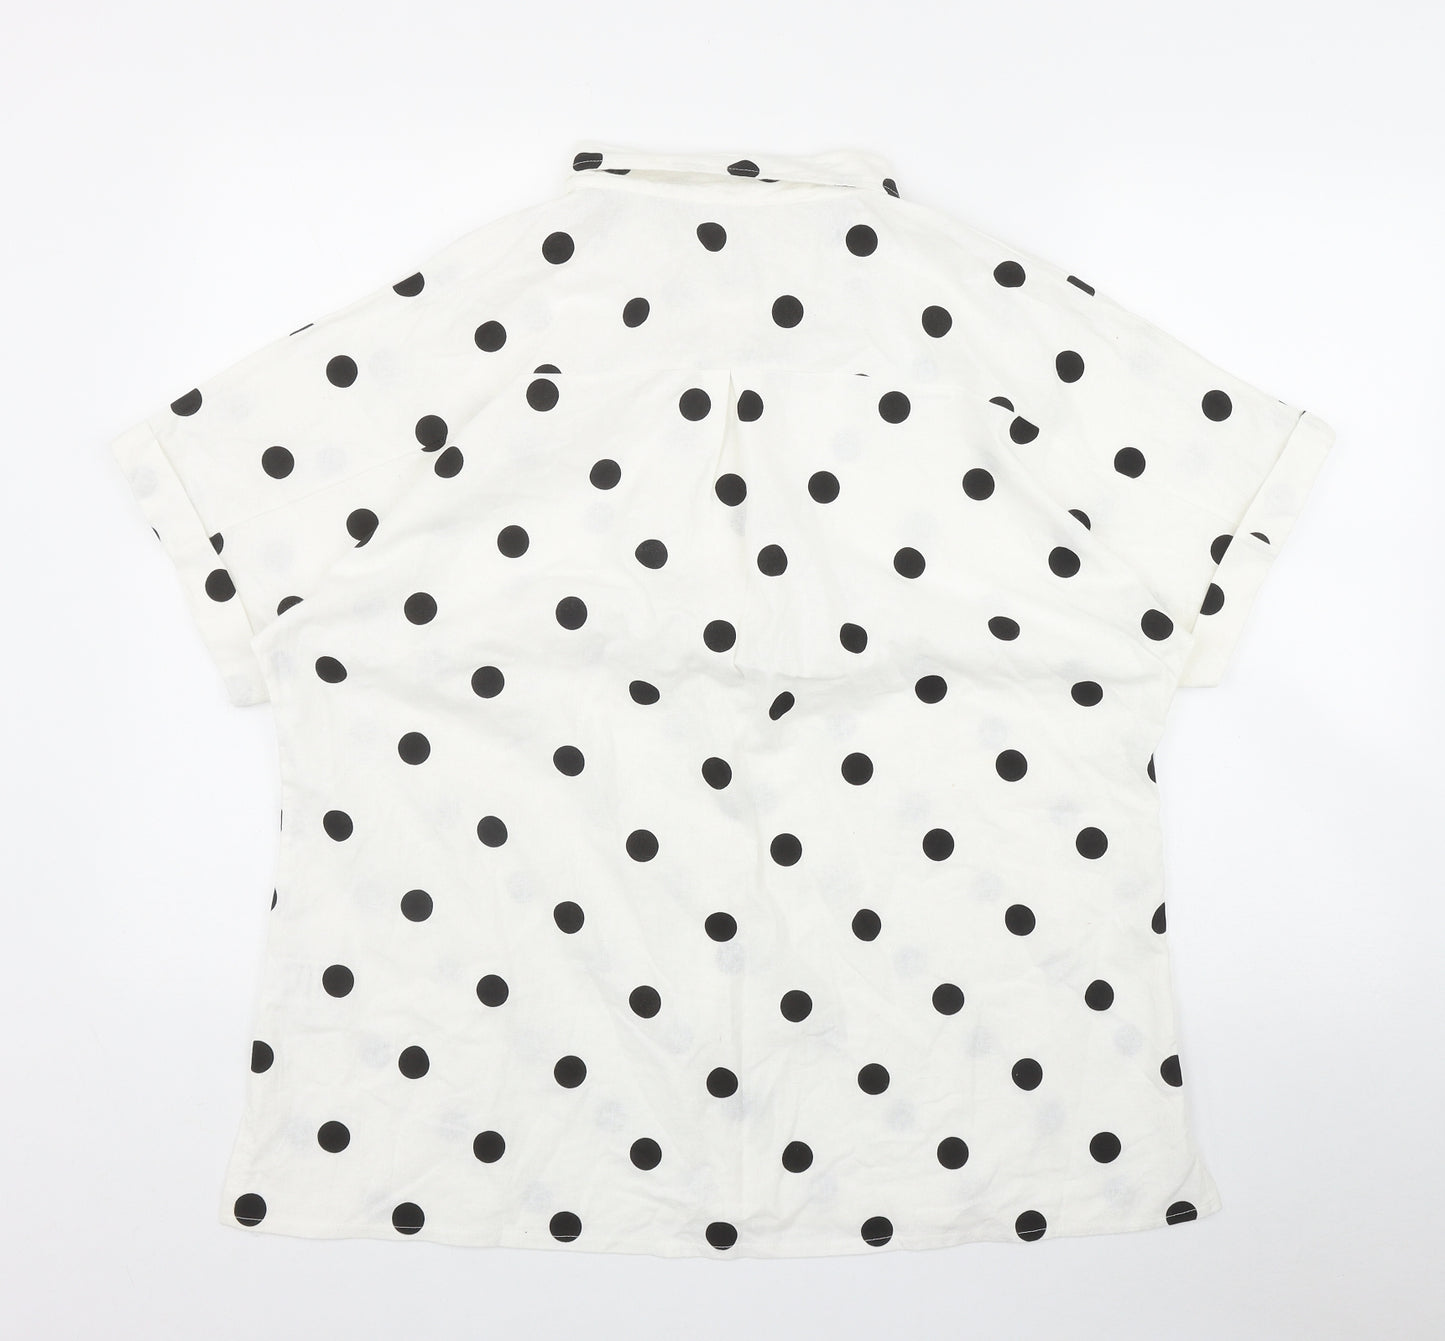 MissLook Womens White Polka Dot Cotton Basic Button-Up Size 2XL Collared